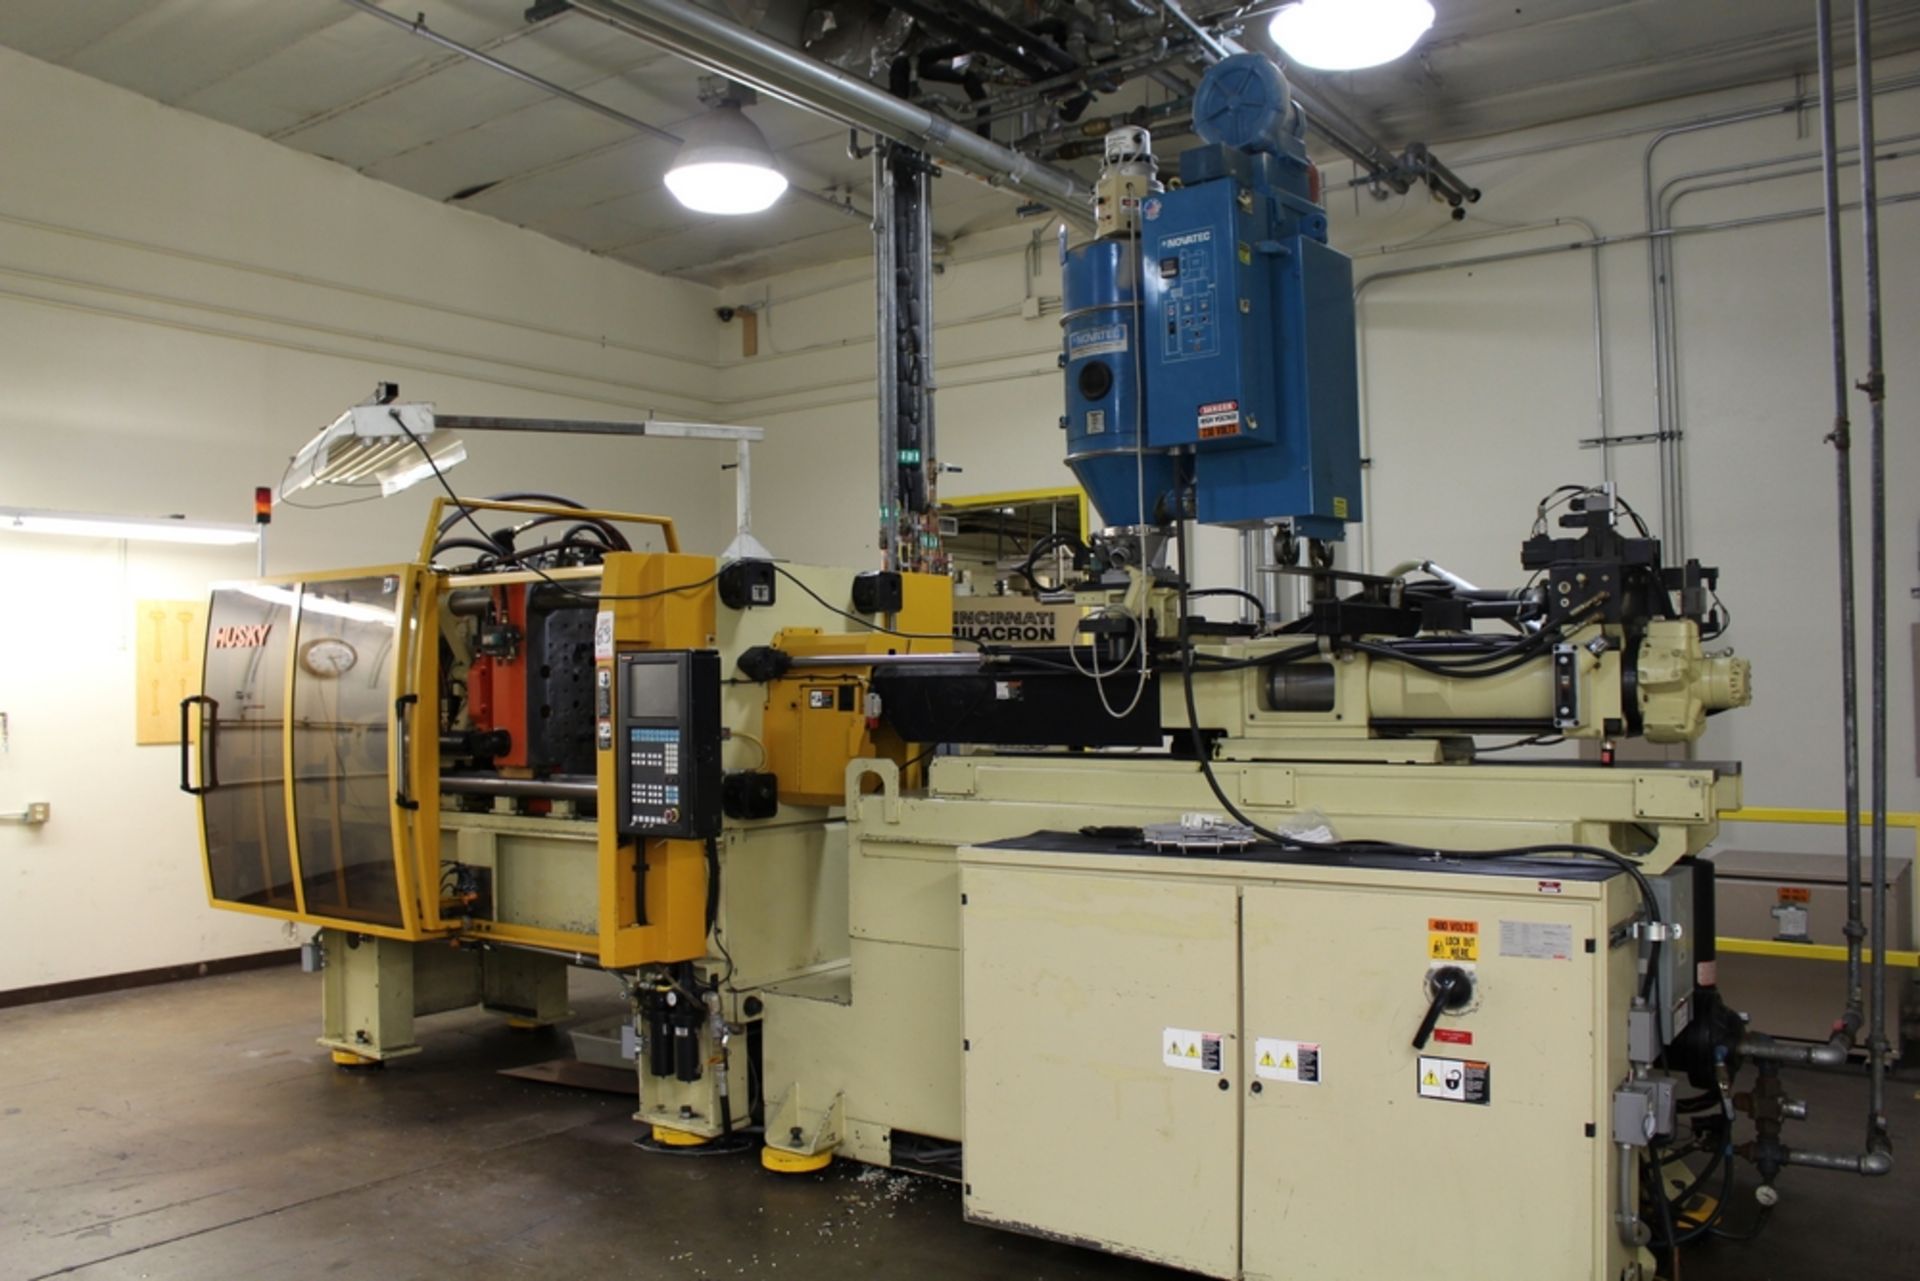 1998 HUSKY 225-TON INJECTION MOLDING MACHINE, MODEL G225GEN-RS50/50, S/N 14708, GE FANUC CONTROL, - Image 4 of 6